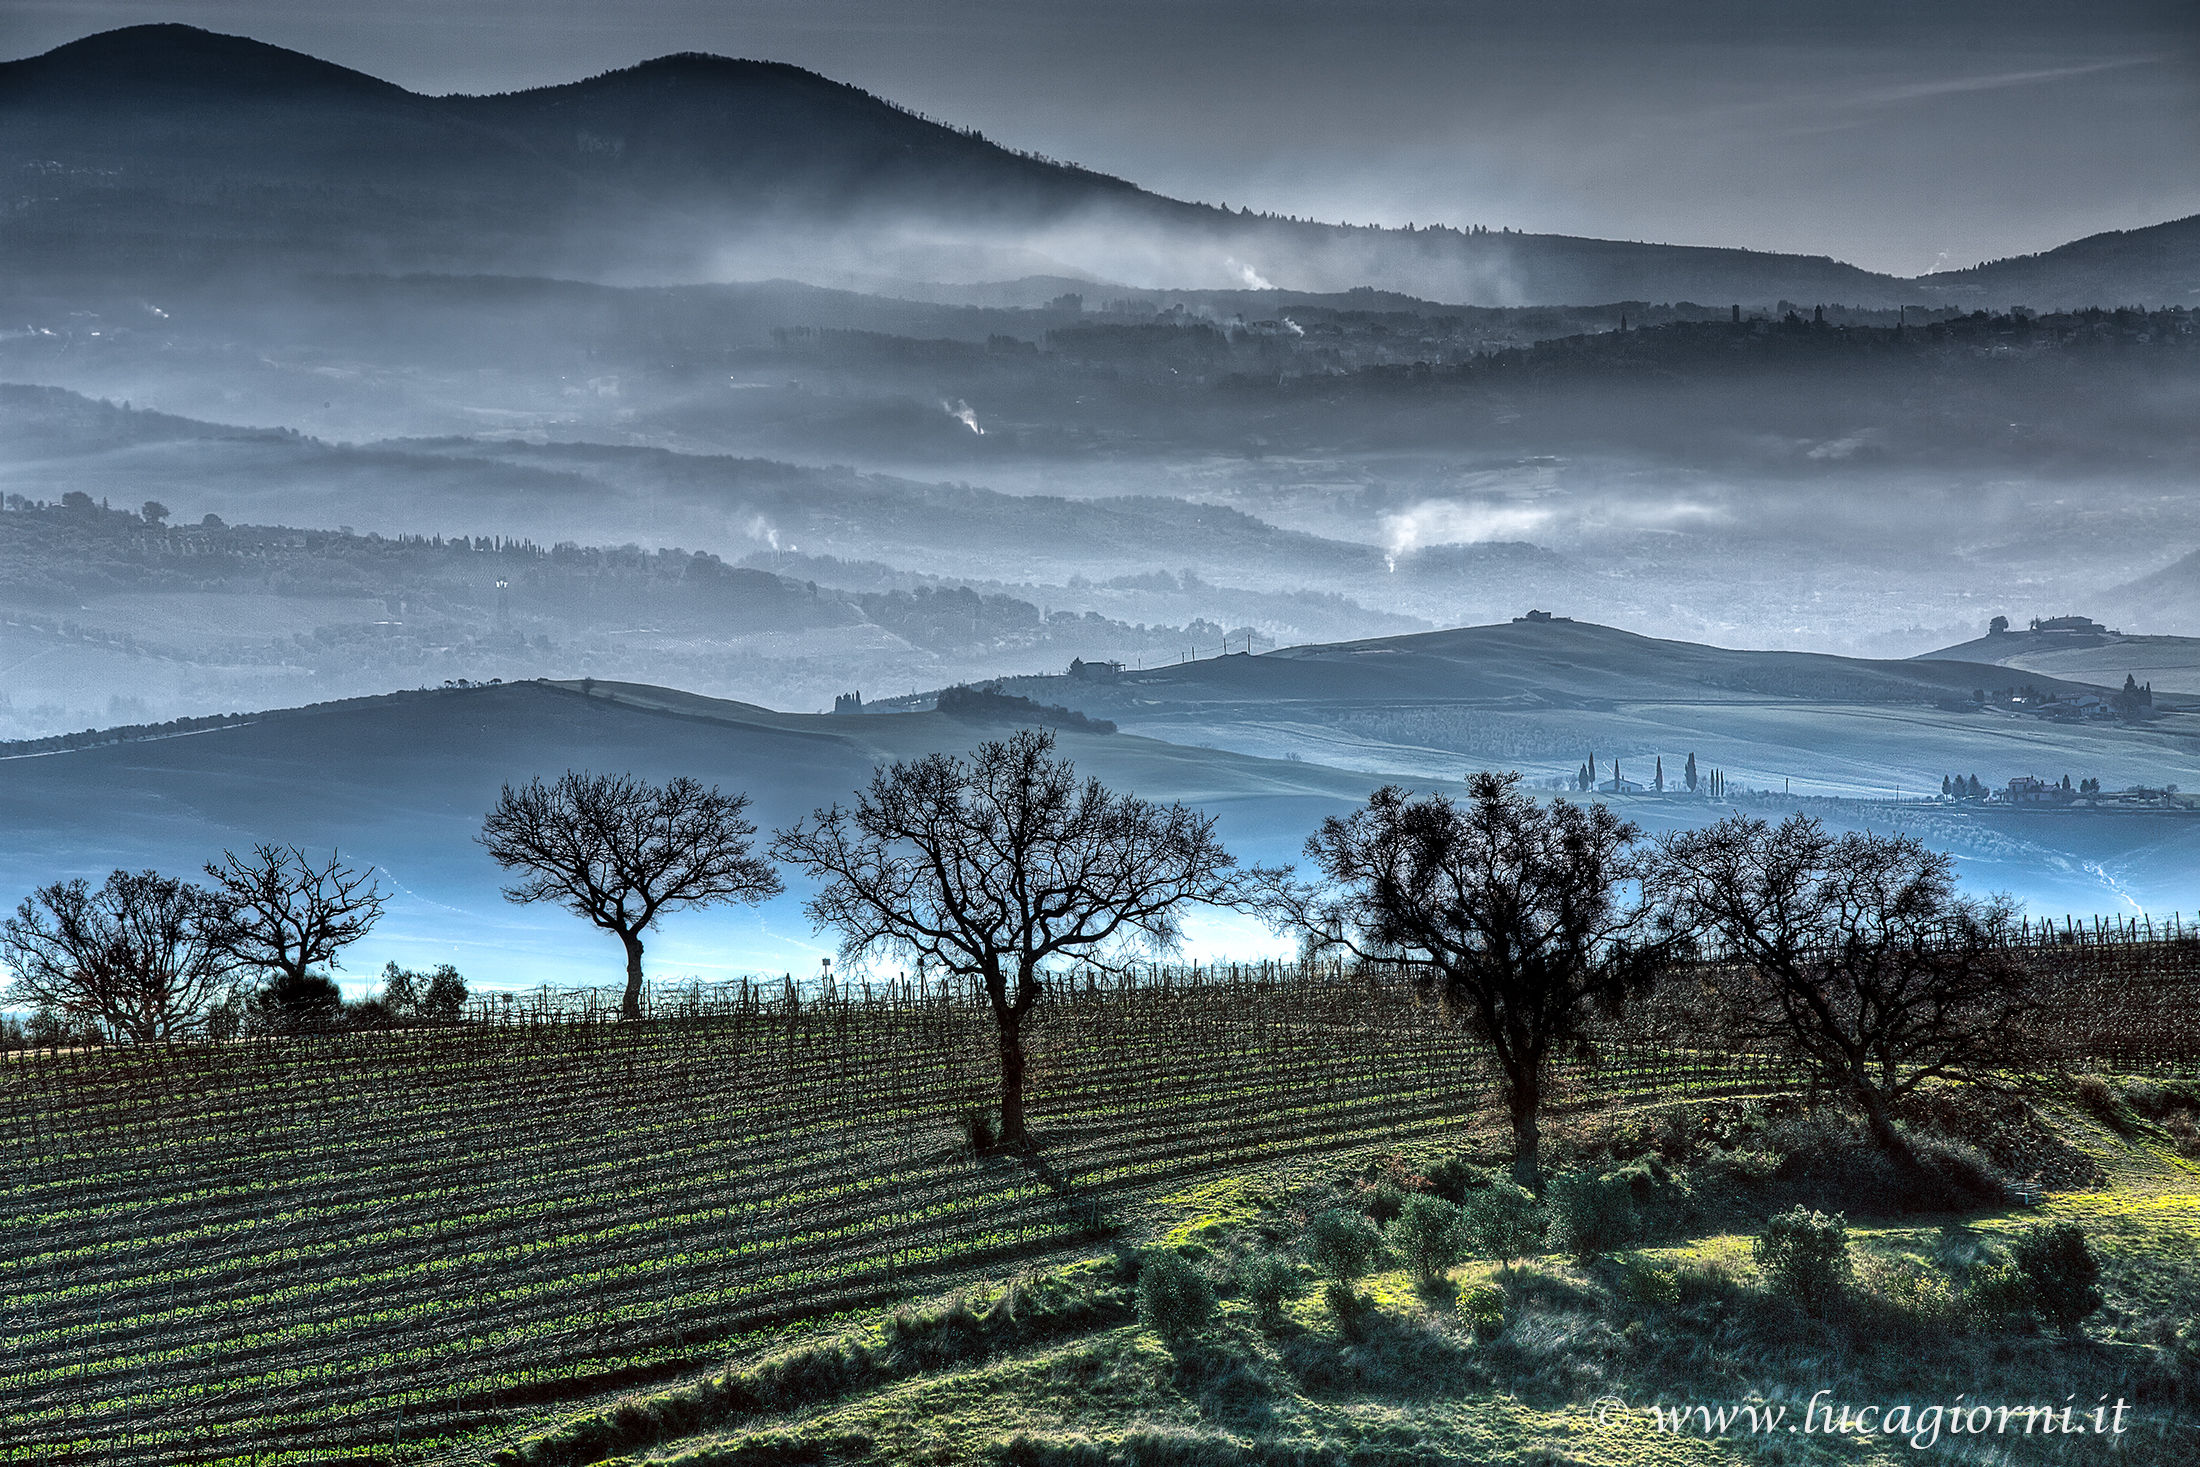 A cold morning in the valleys below Mount Amiata...